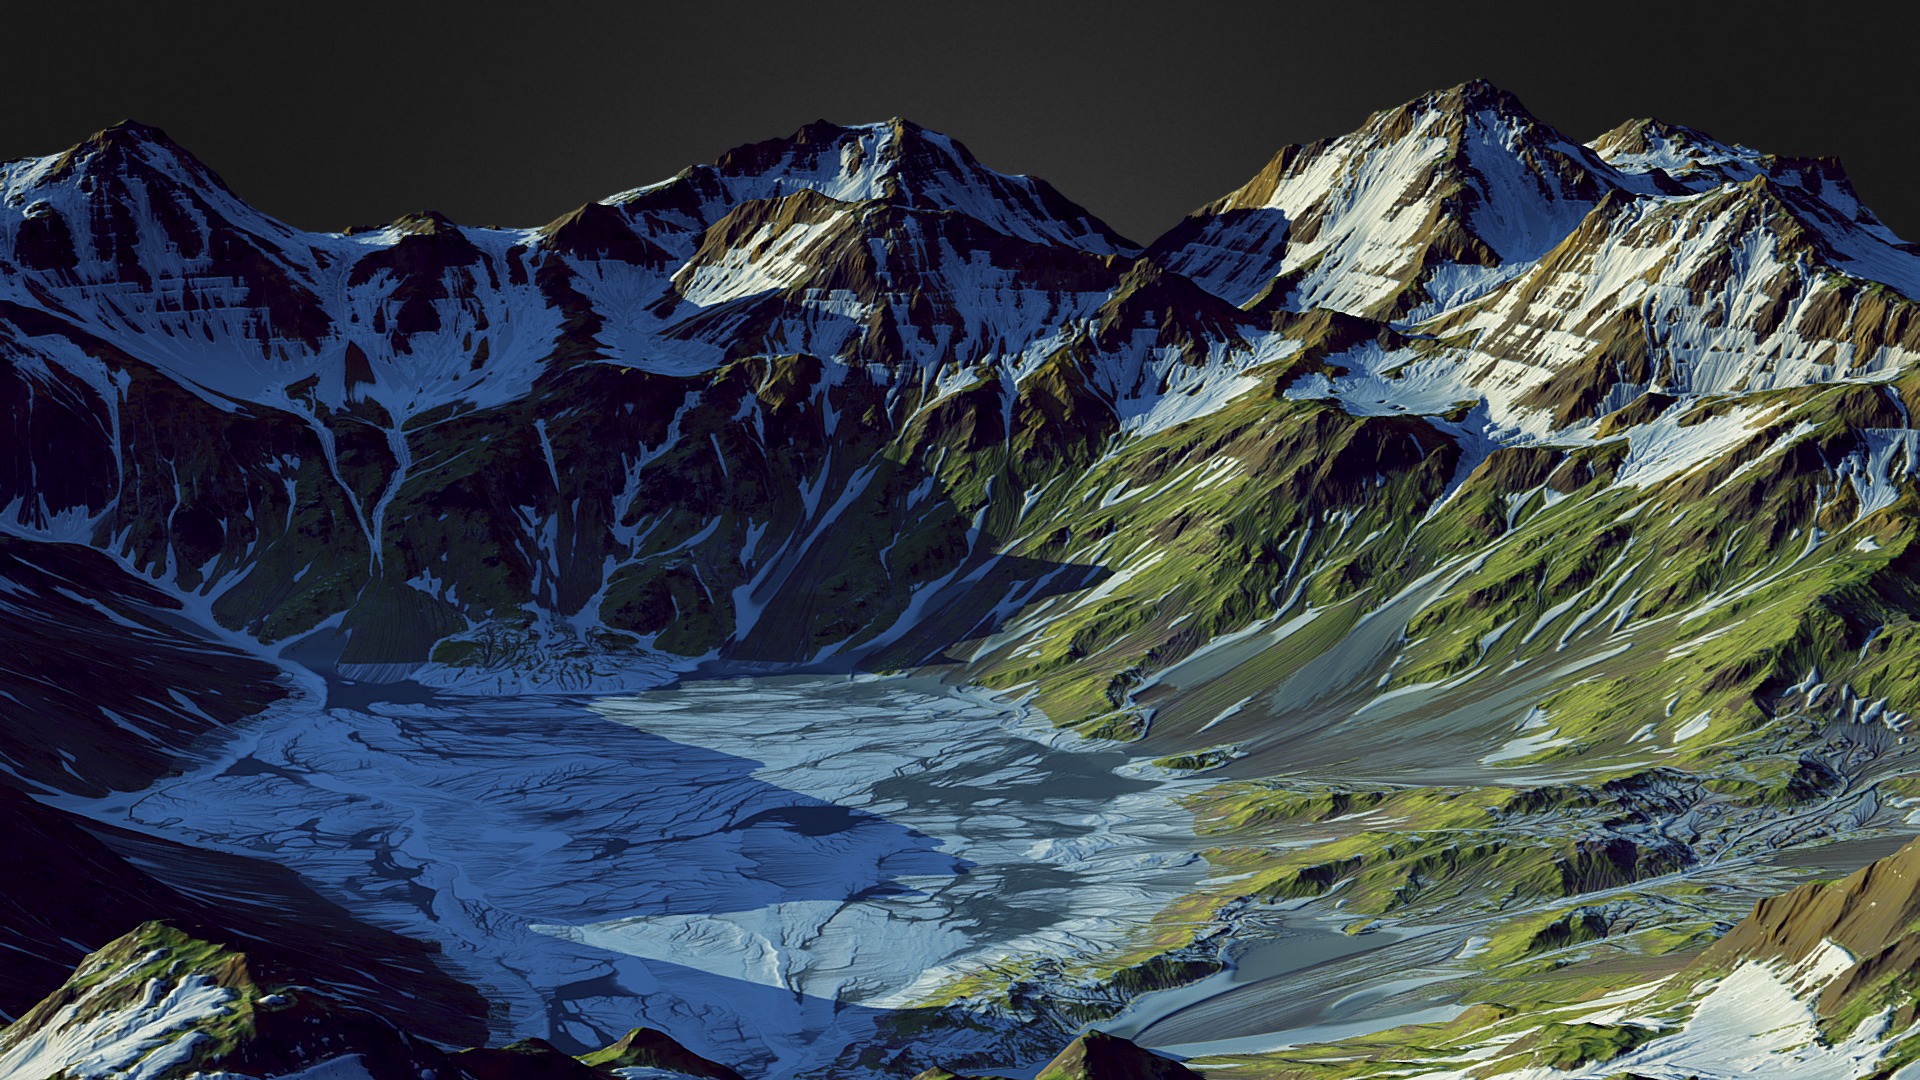 Fully Procedural Landscape created in World Machine.
https://www.artstation.com/sergddd
3d model ready for your project!

-High poly and Low poly mesh

-4096pix Textures (color/light/normal/height/splat/snow and other) - Melting Mountain Lake (World Machine) - Buy Royalty Free 3D model by gamewarming 3d model